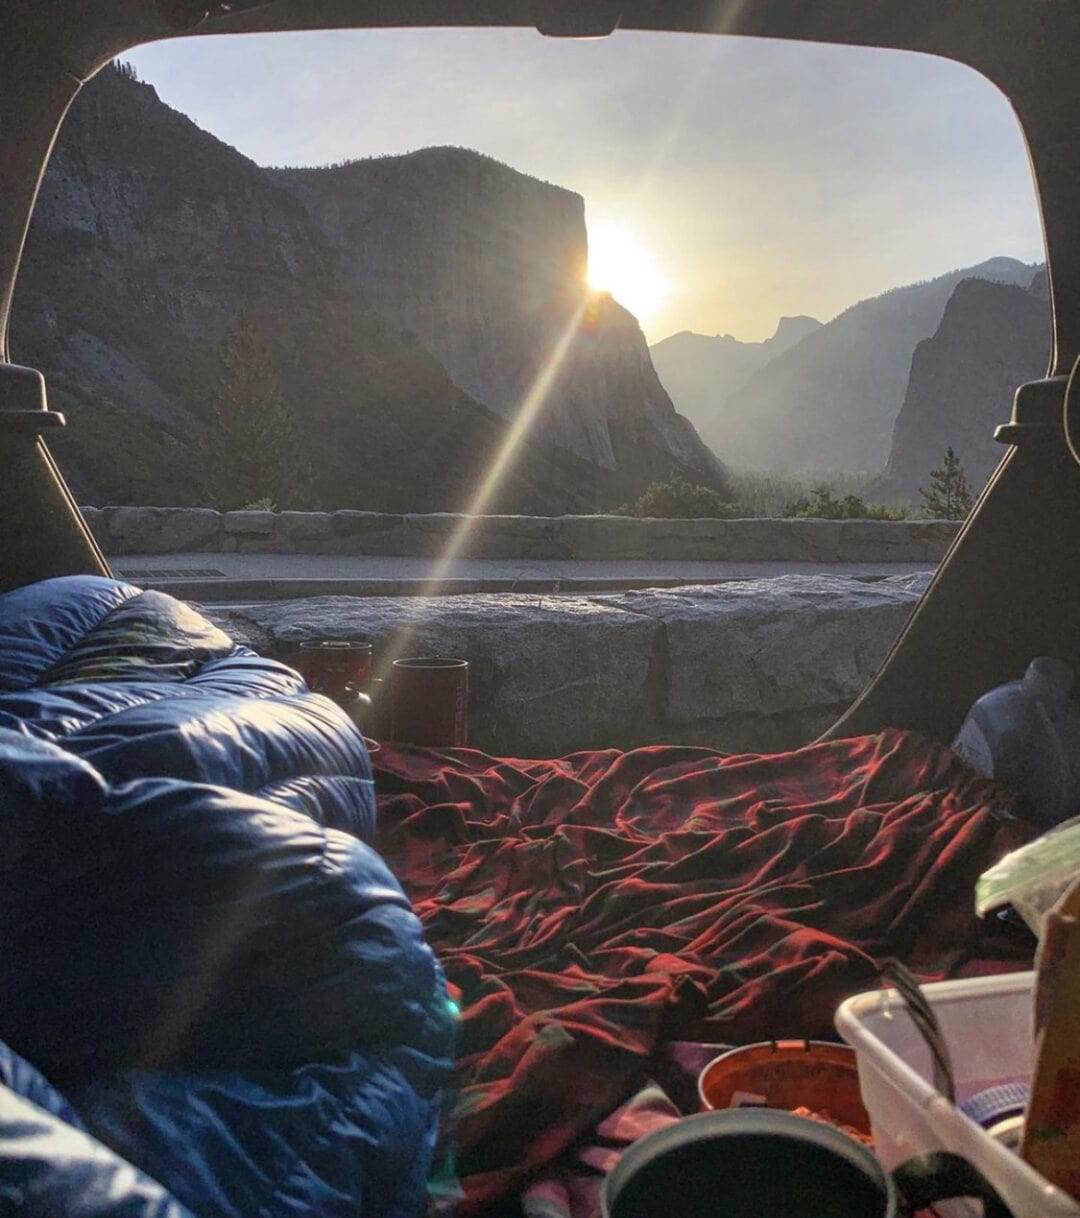 View of a mountain sunset through the open hatch of a car, with blankets and sleeping bags in the foreground